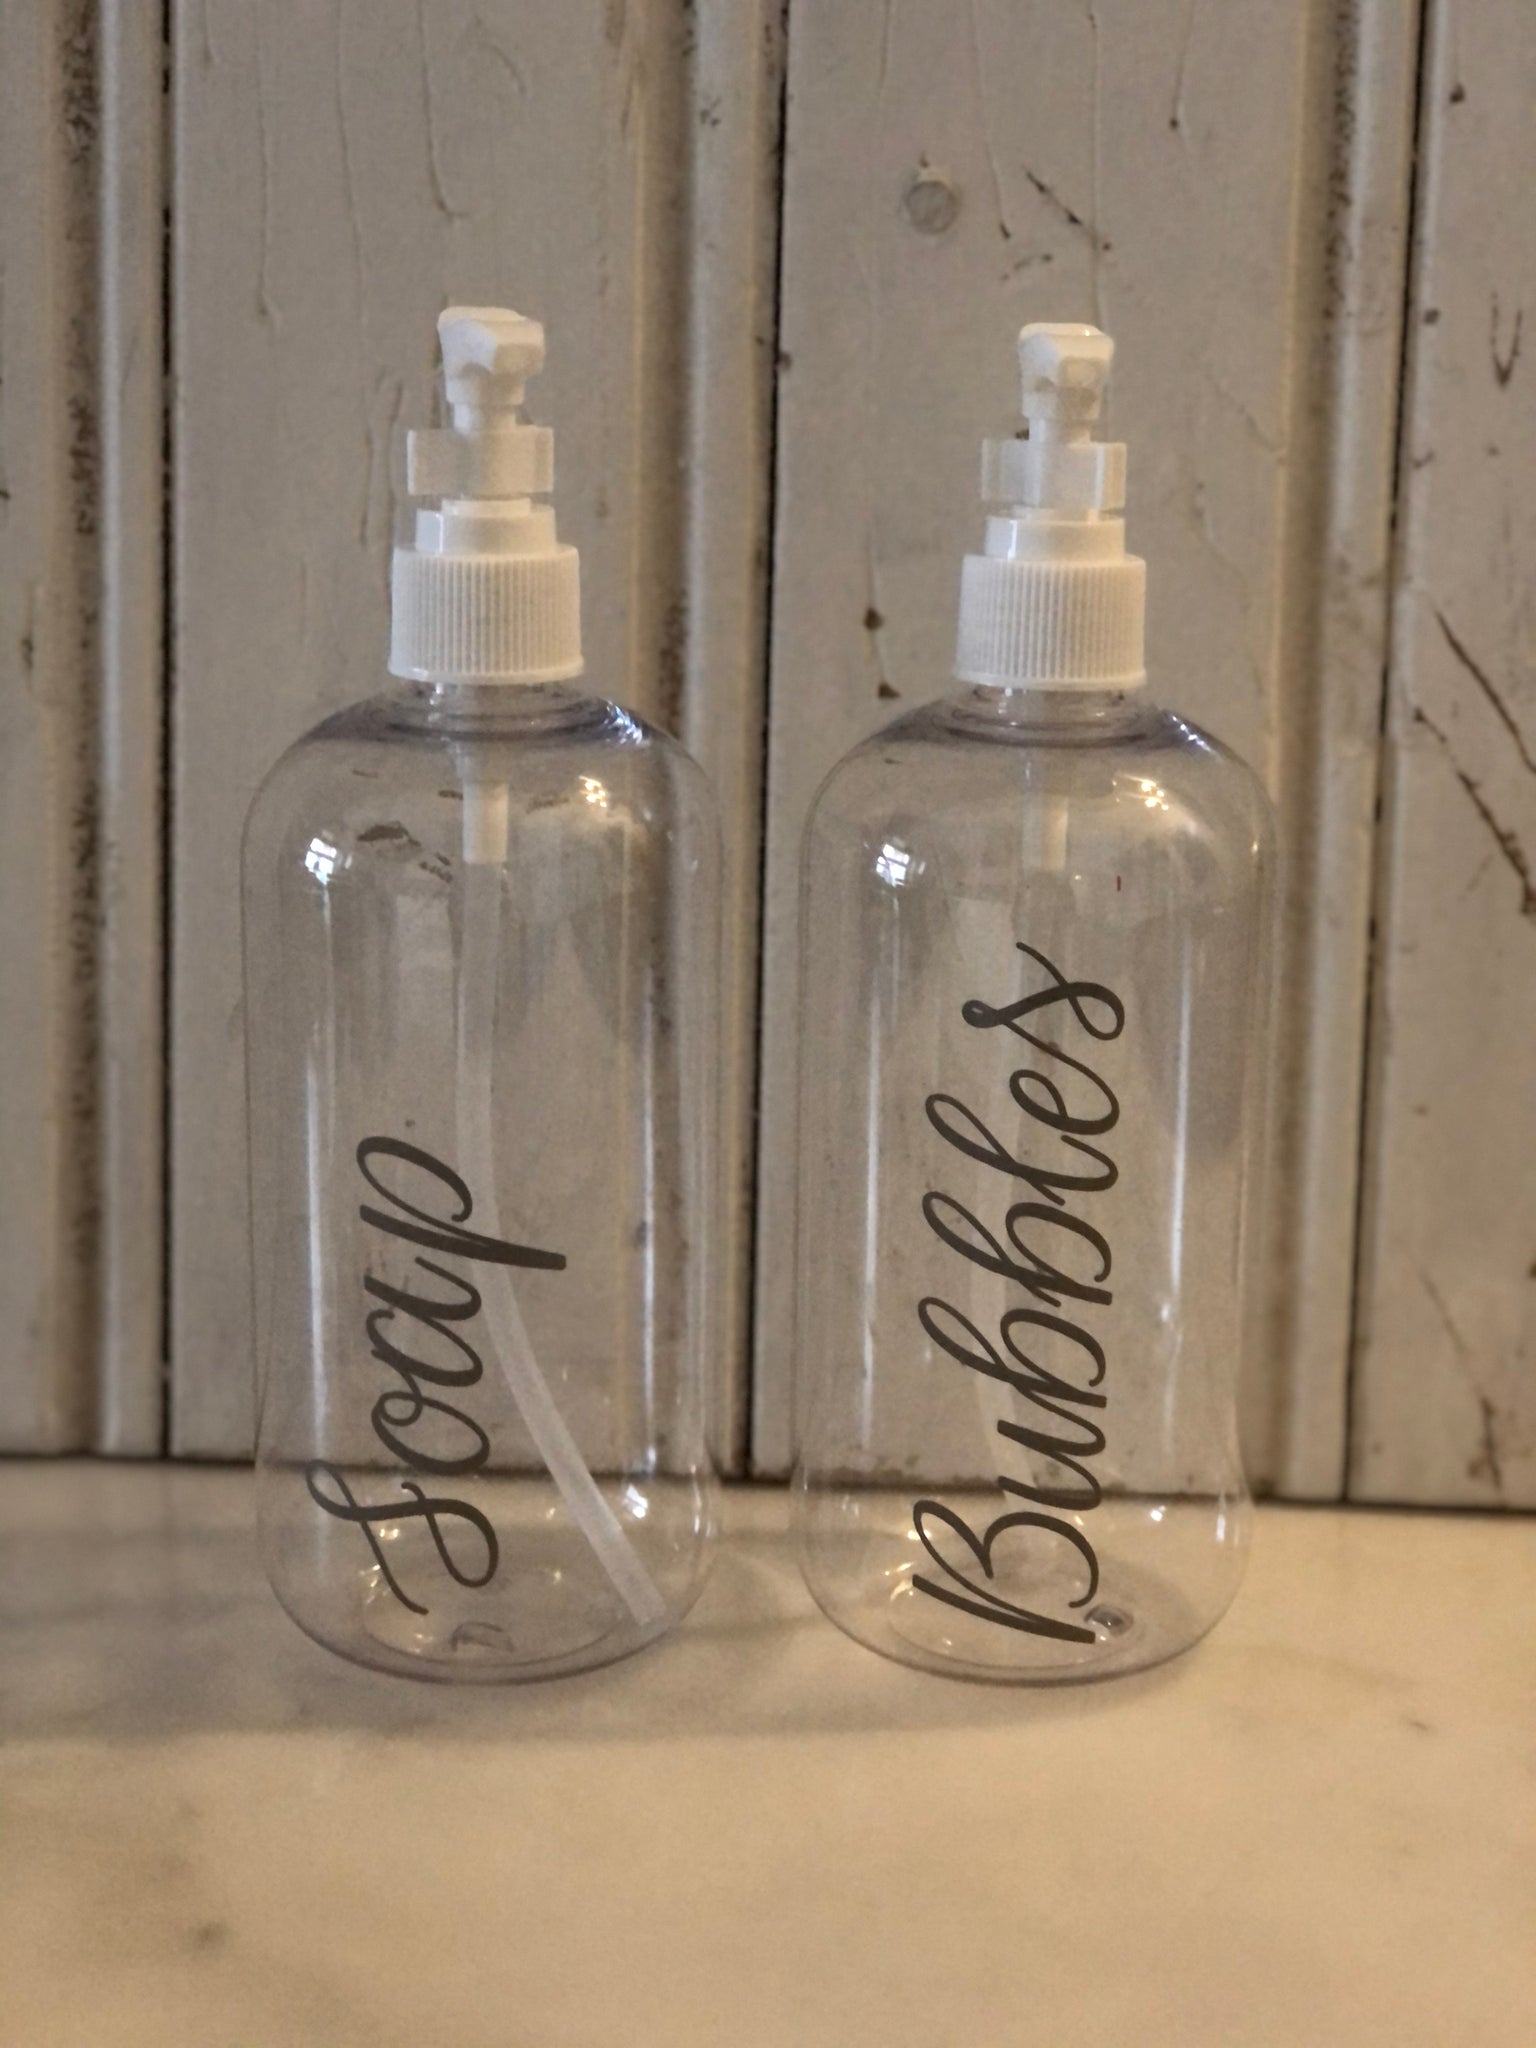 Refillable bottles for Soap and Bubbles